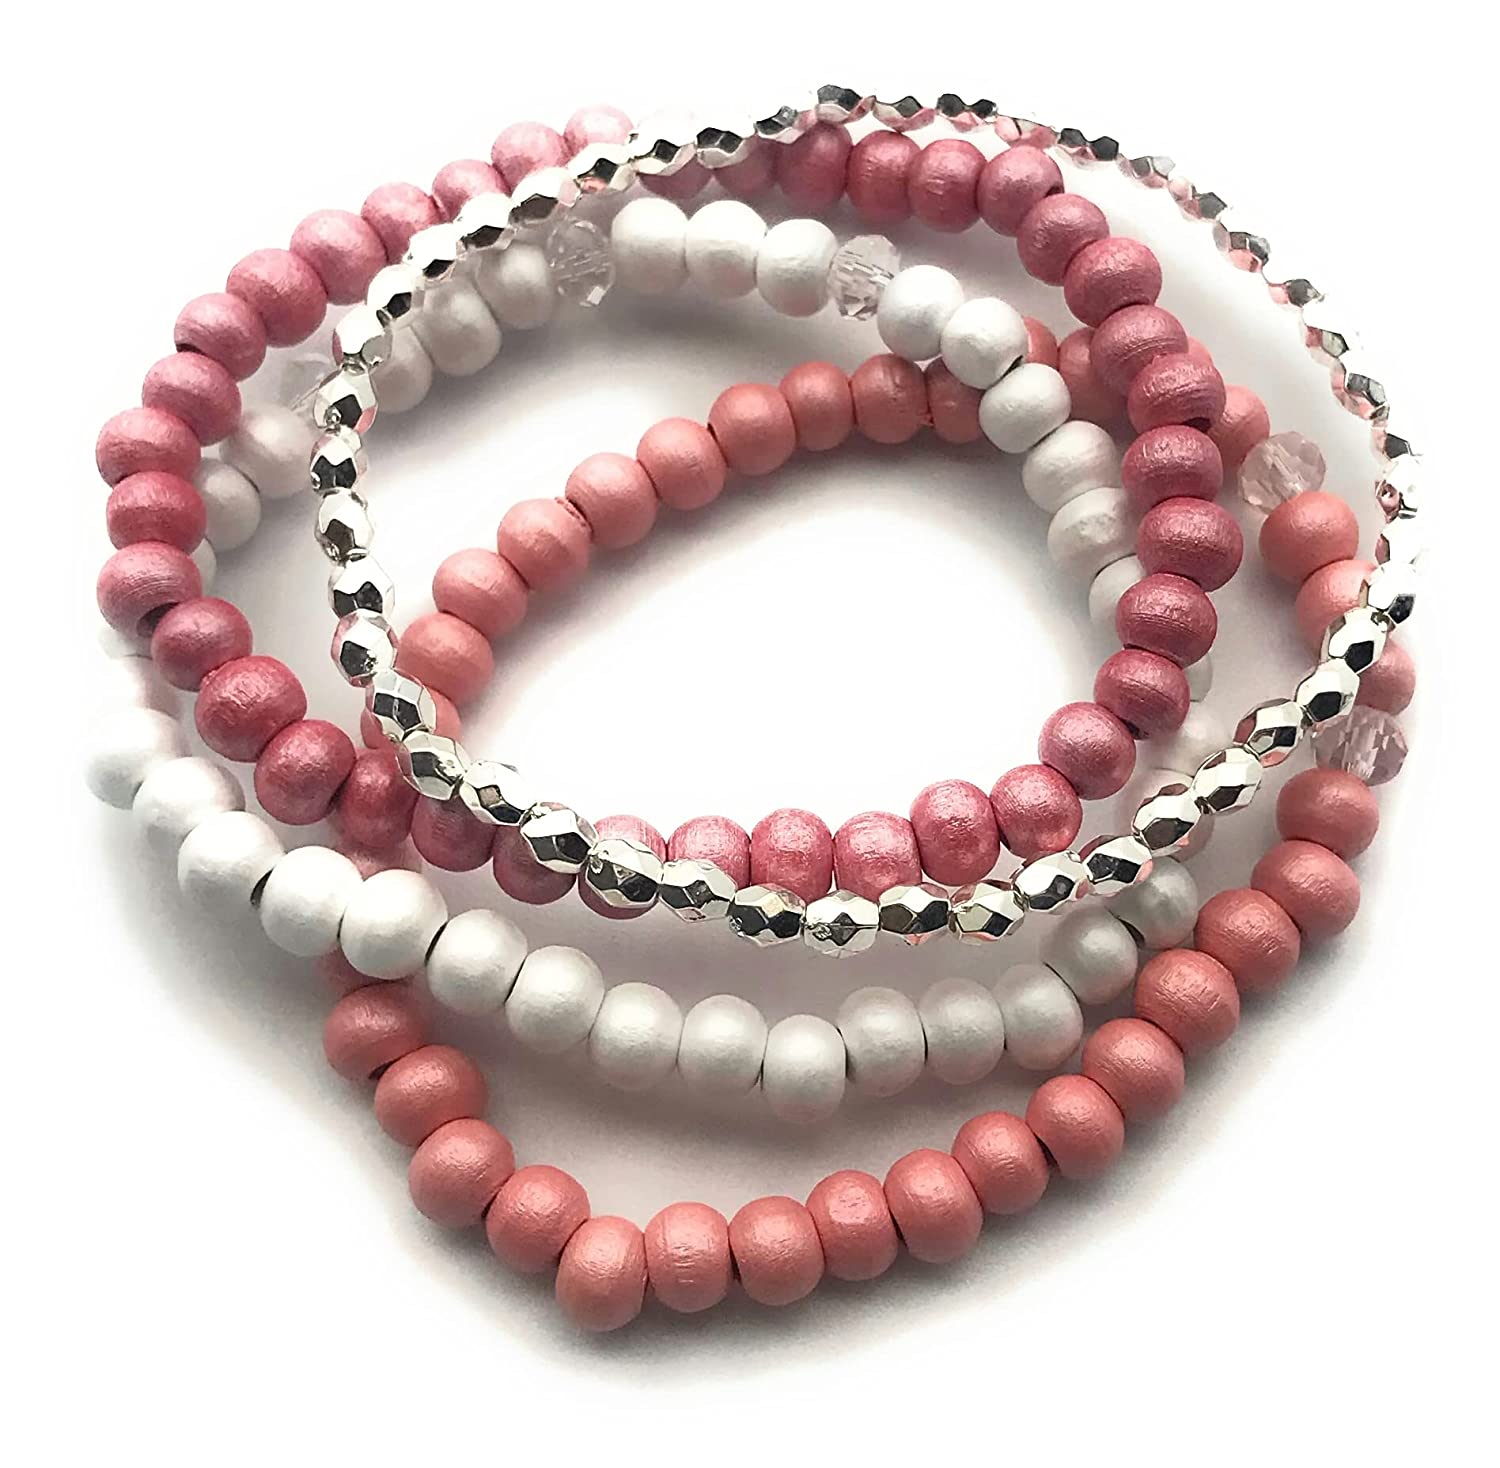 Pink and Silver Set of 4 Wooden Beaded Stretch Bracelets from Scott D Jewelry Designs